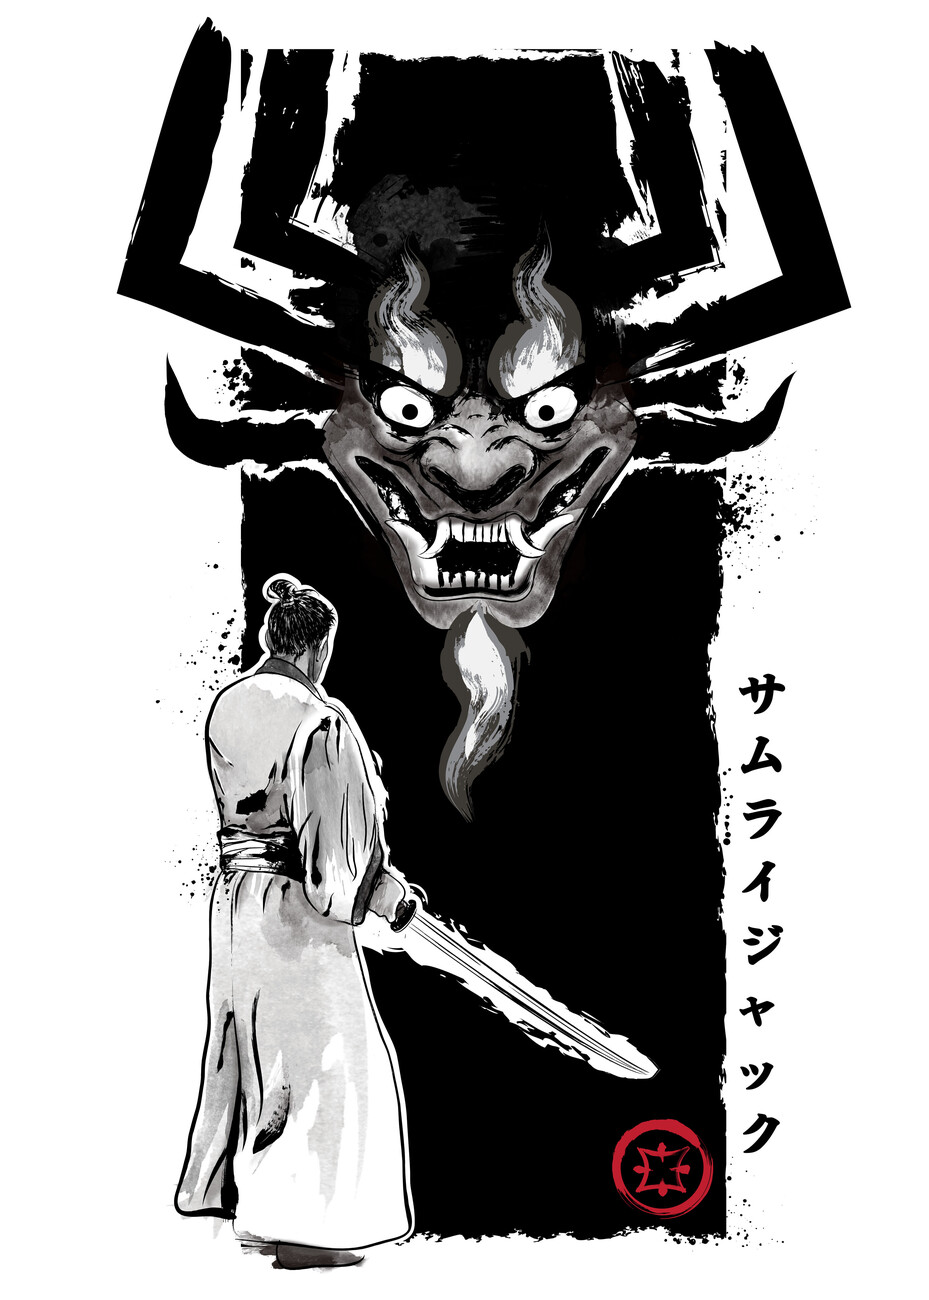 Afro samurai, The largest selection of gifts and posters